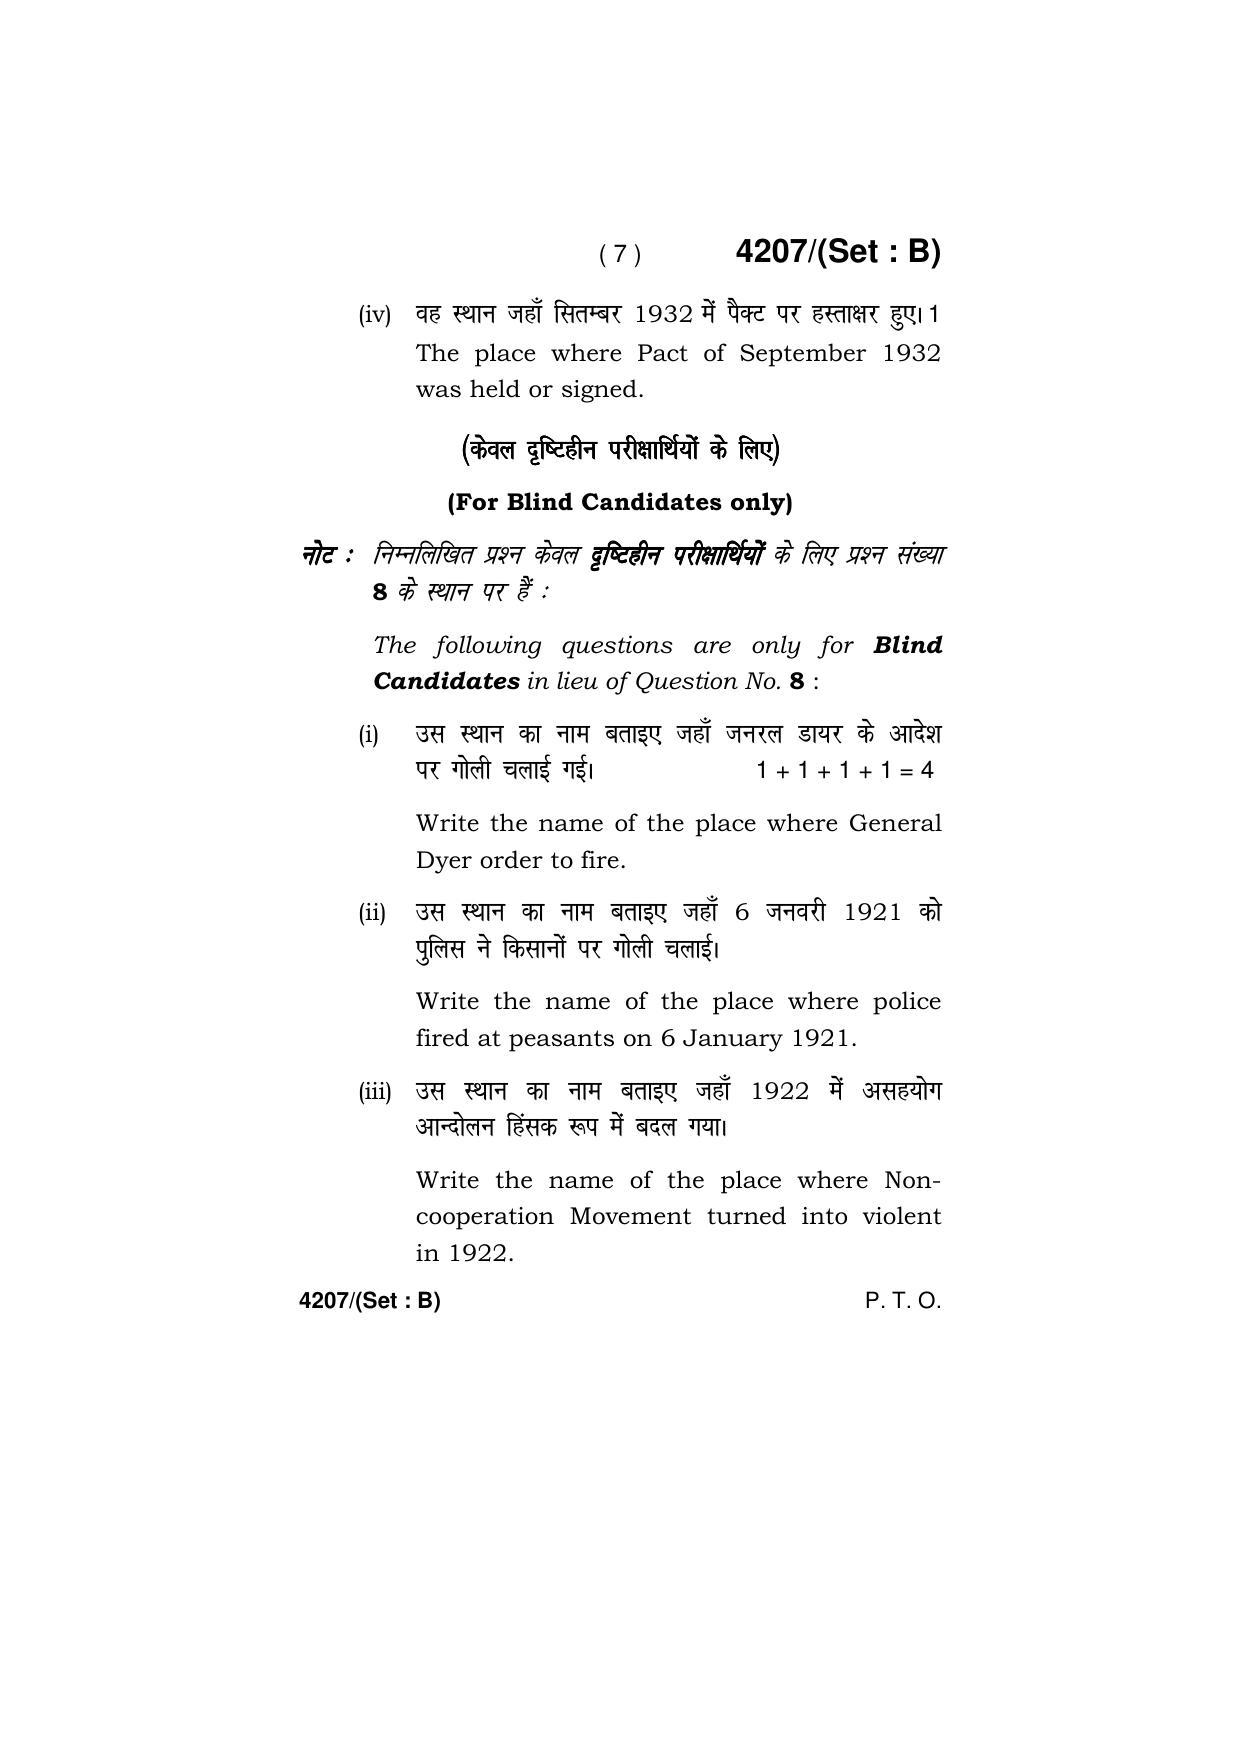 Haryana Board HBSE Class 10 Social Science (All Set) 2019 Question Paper - Page 22